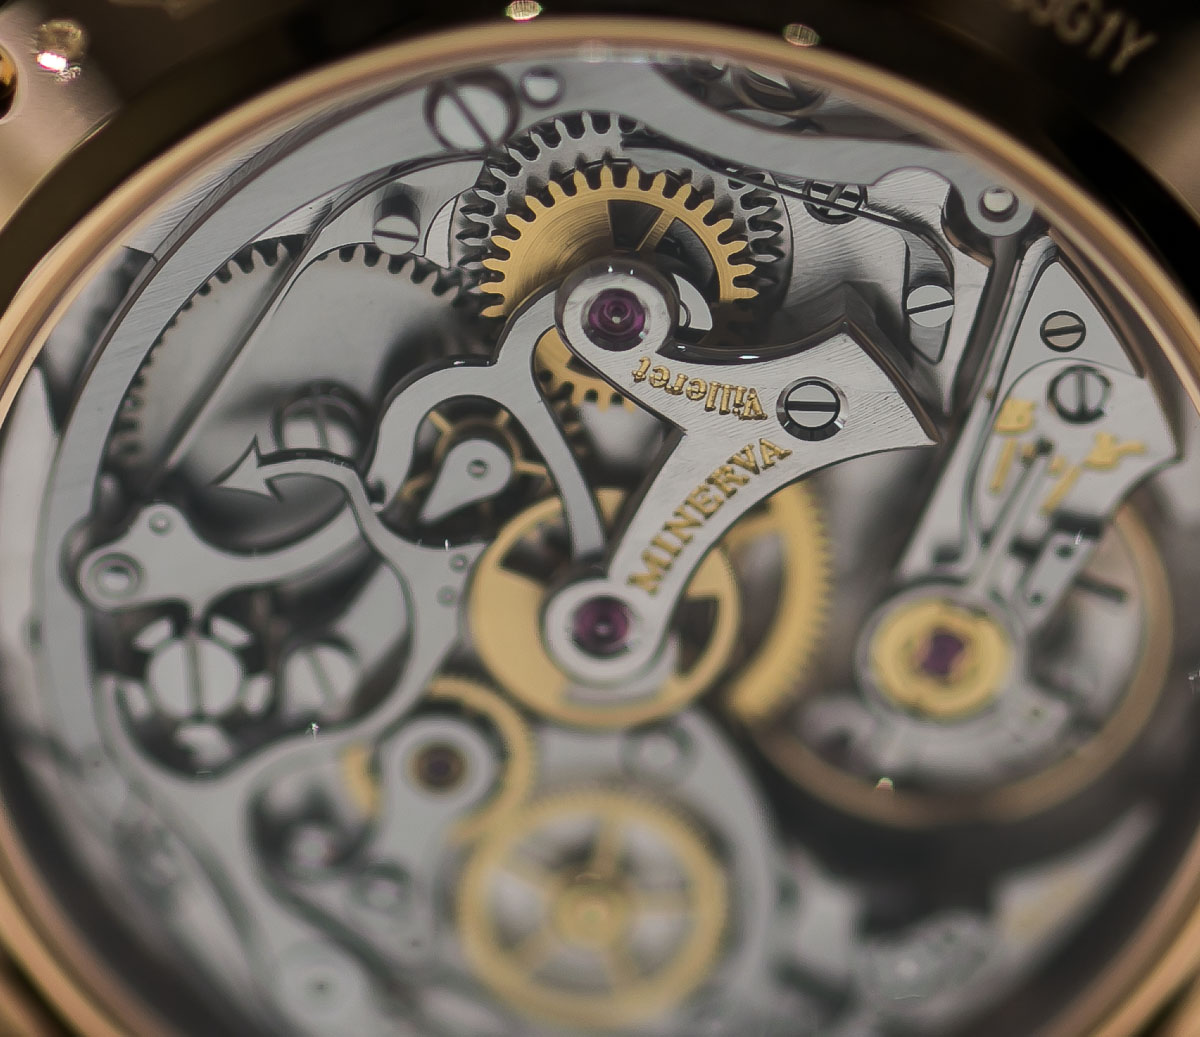 TimeZone : Montblanc » SIHH: Photos from the Montblanc 2014 Collection